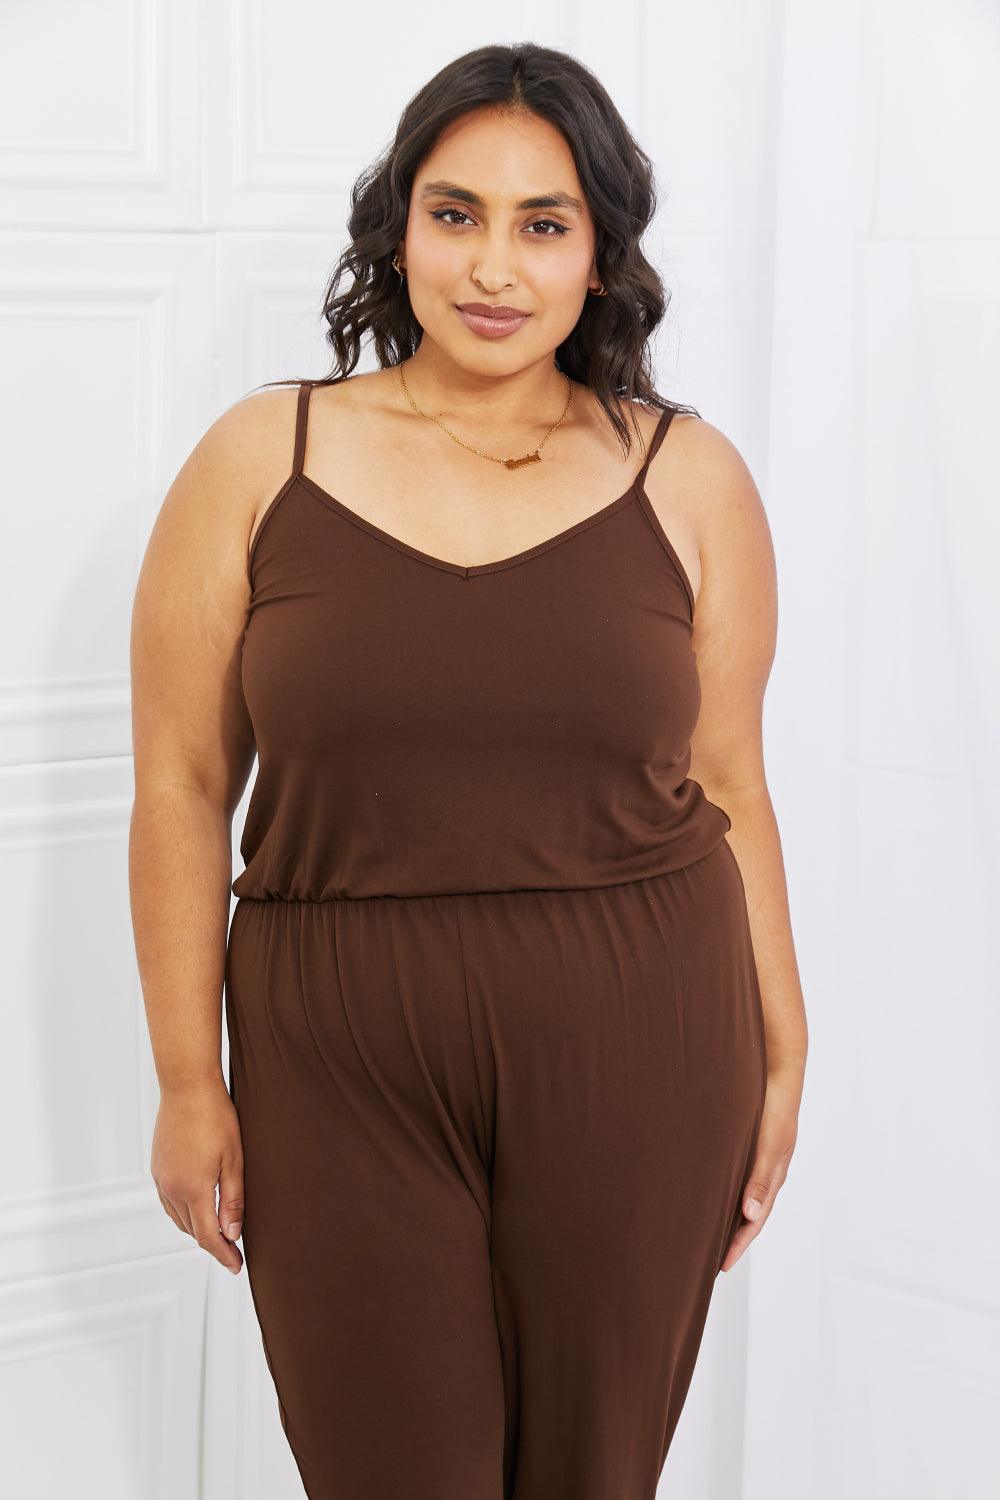 Capella Comfy Casual Full Size Solid Elastic Waistband Jumpsuit in Chocolate - Glamorous Boutique USA L.L.C.